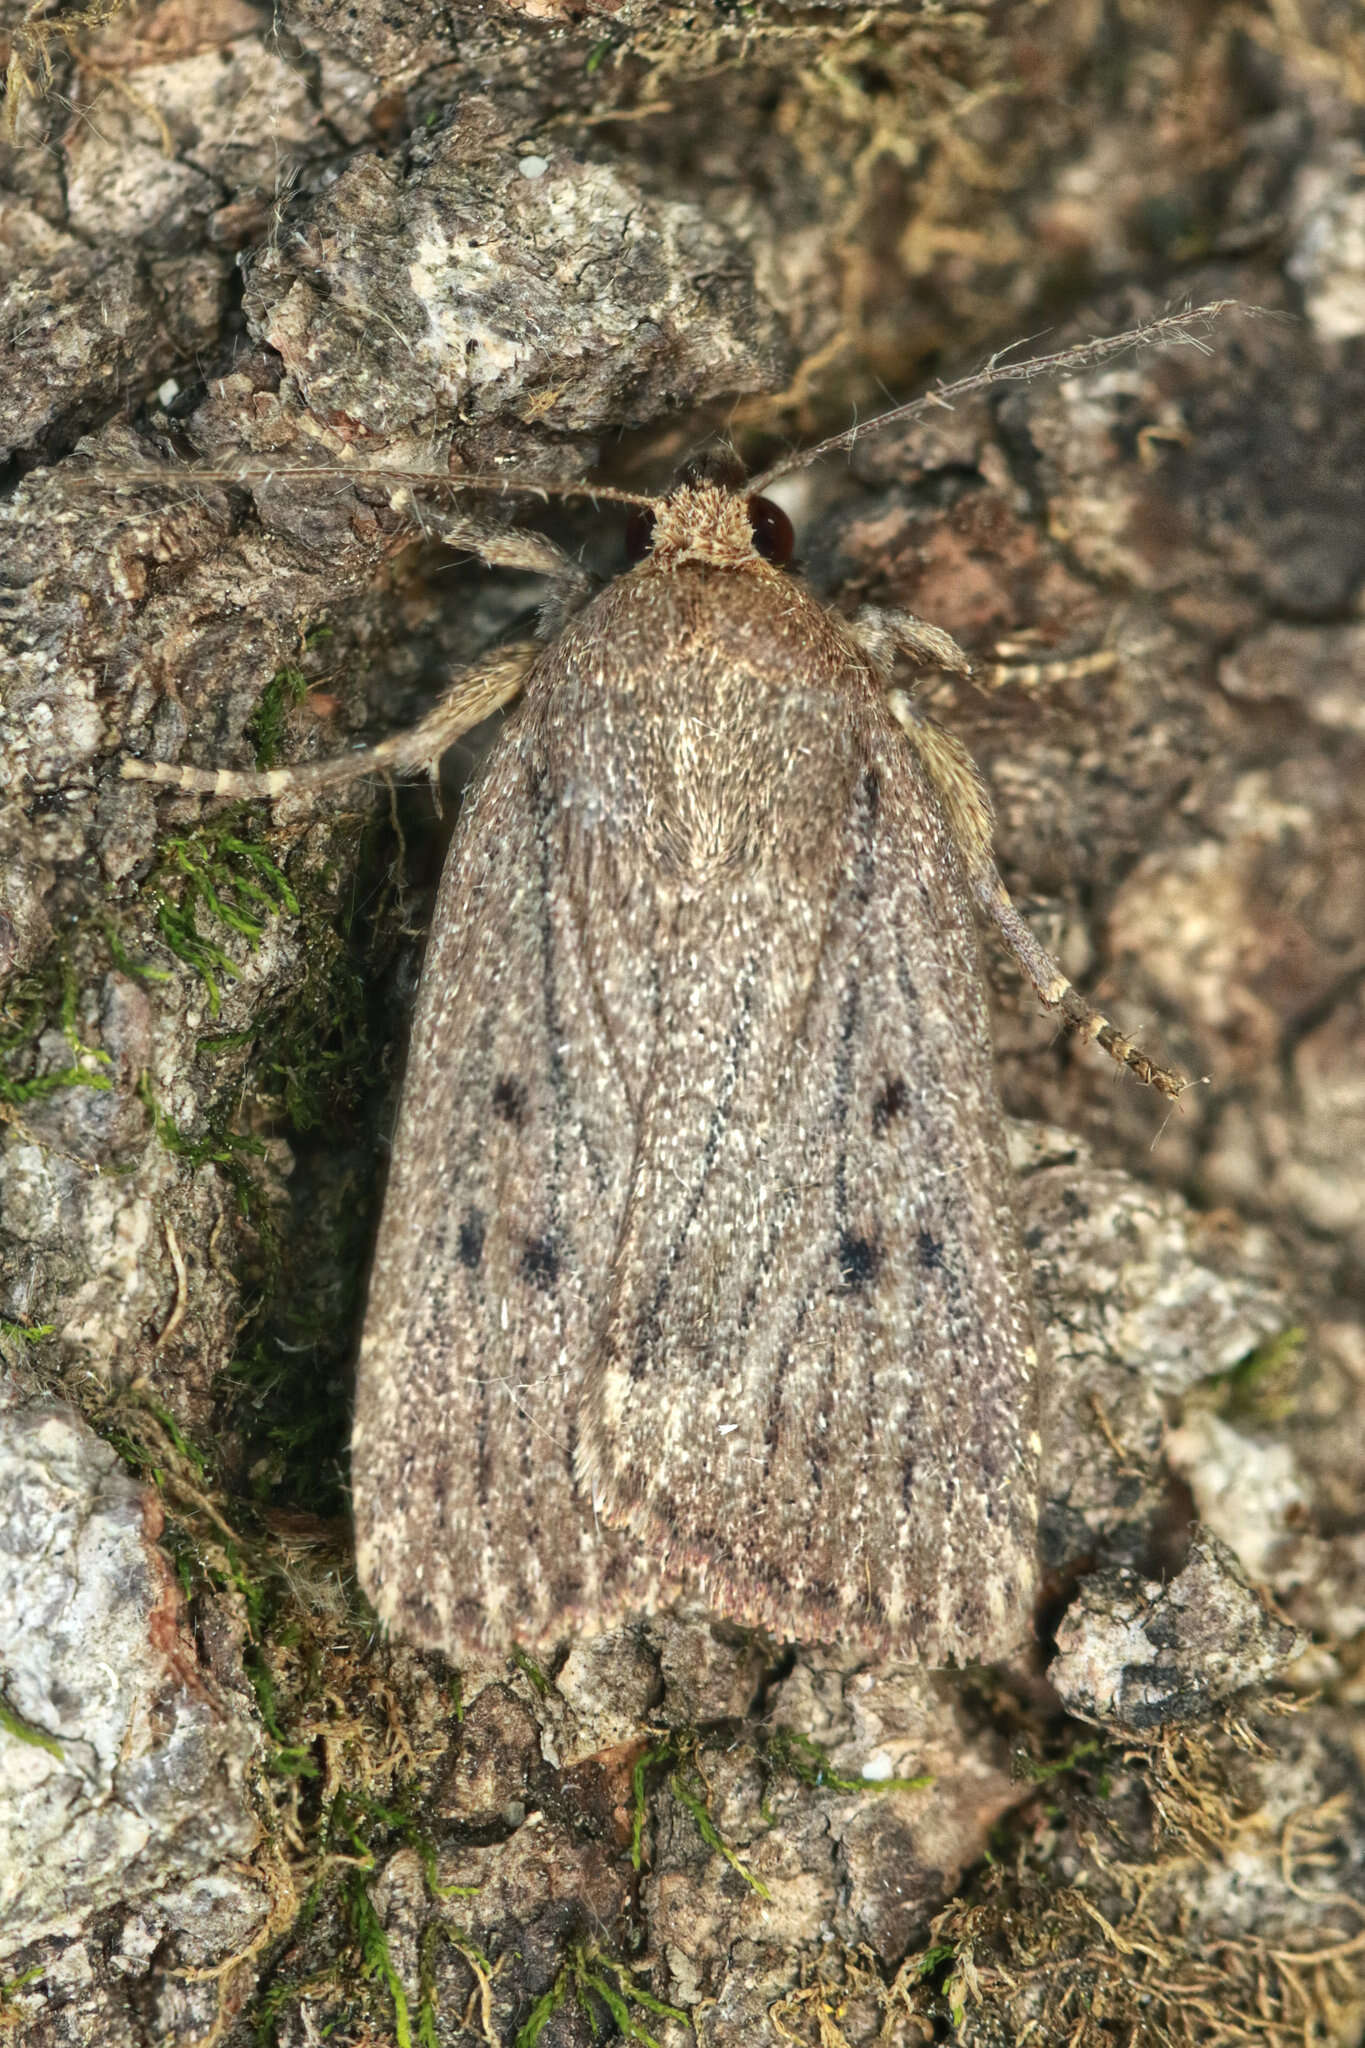 Image of mouse moth